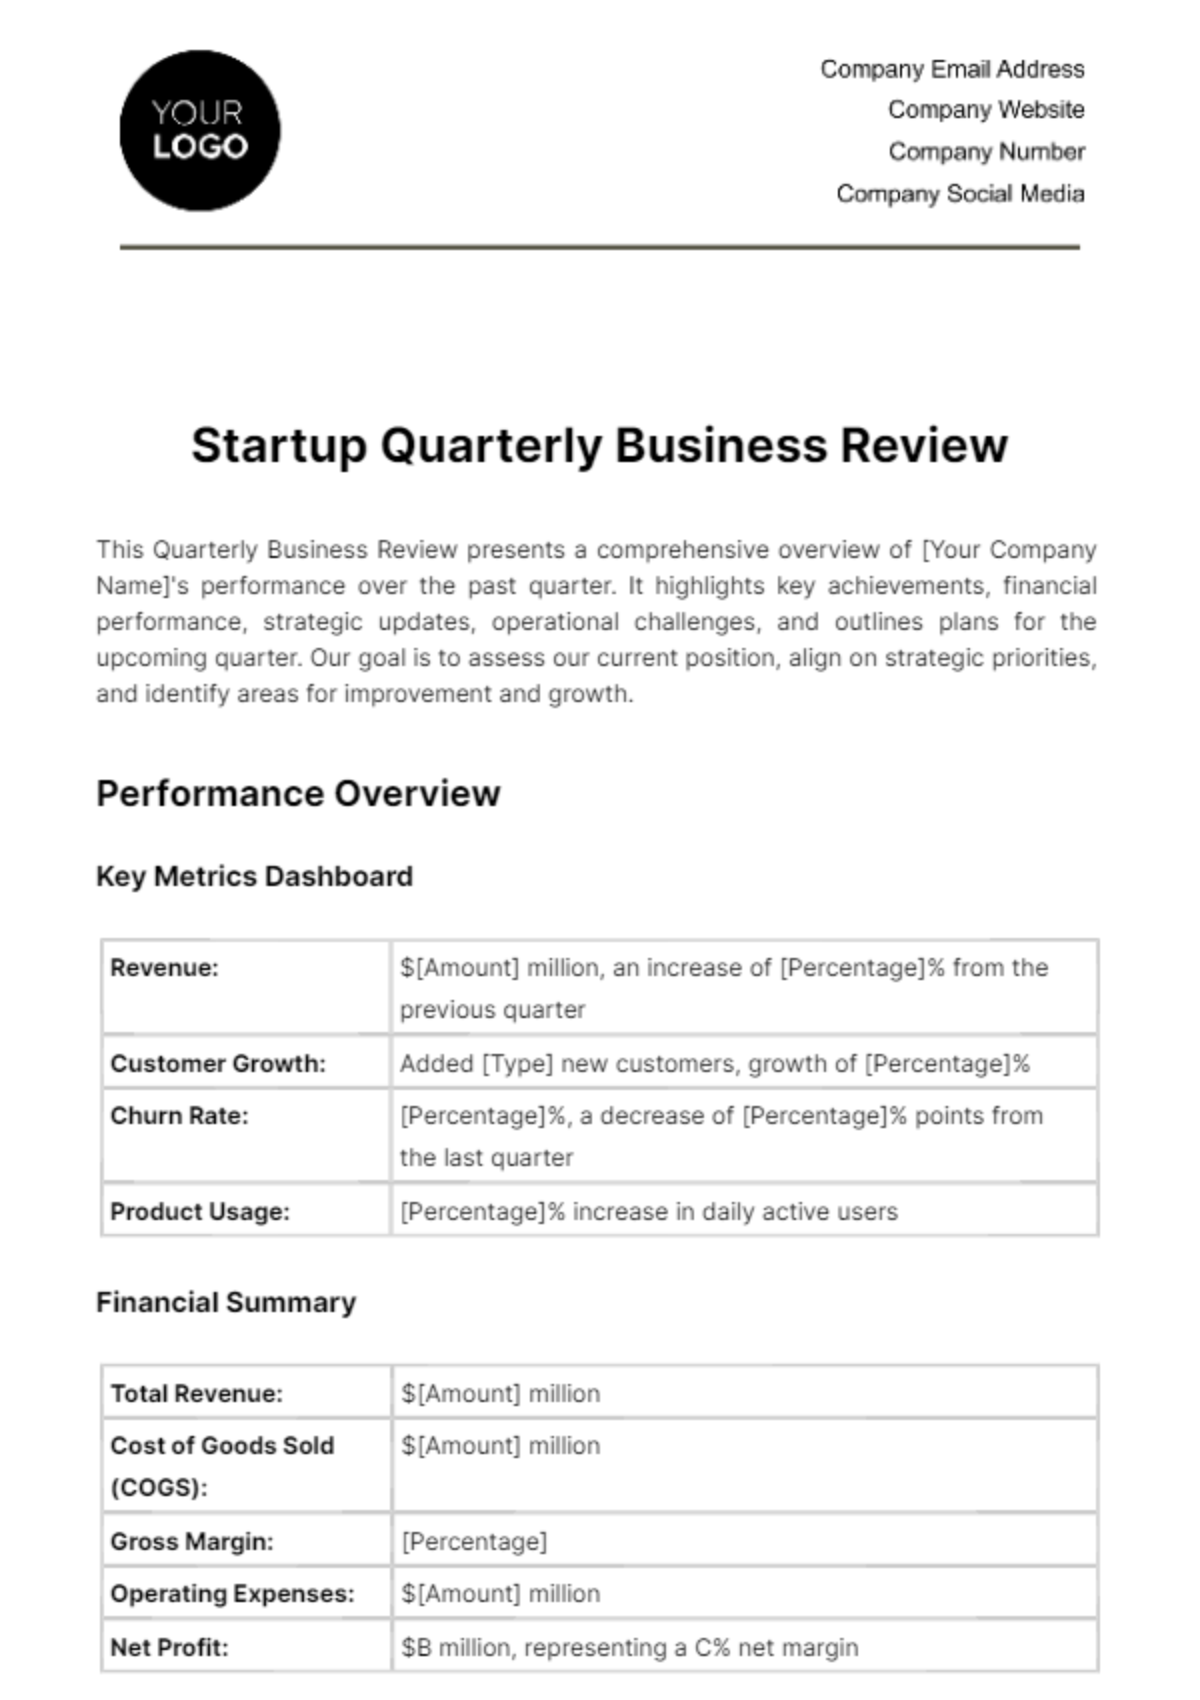 Startup Quarterly Business Review Template